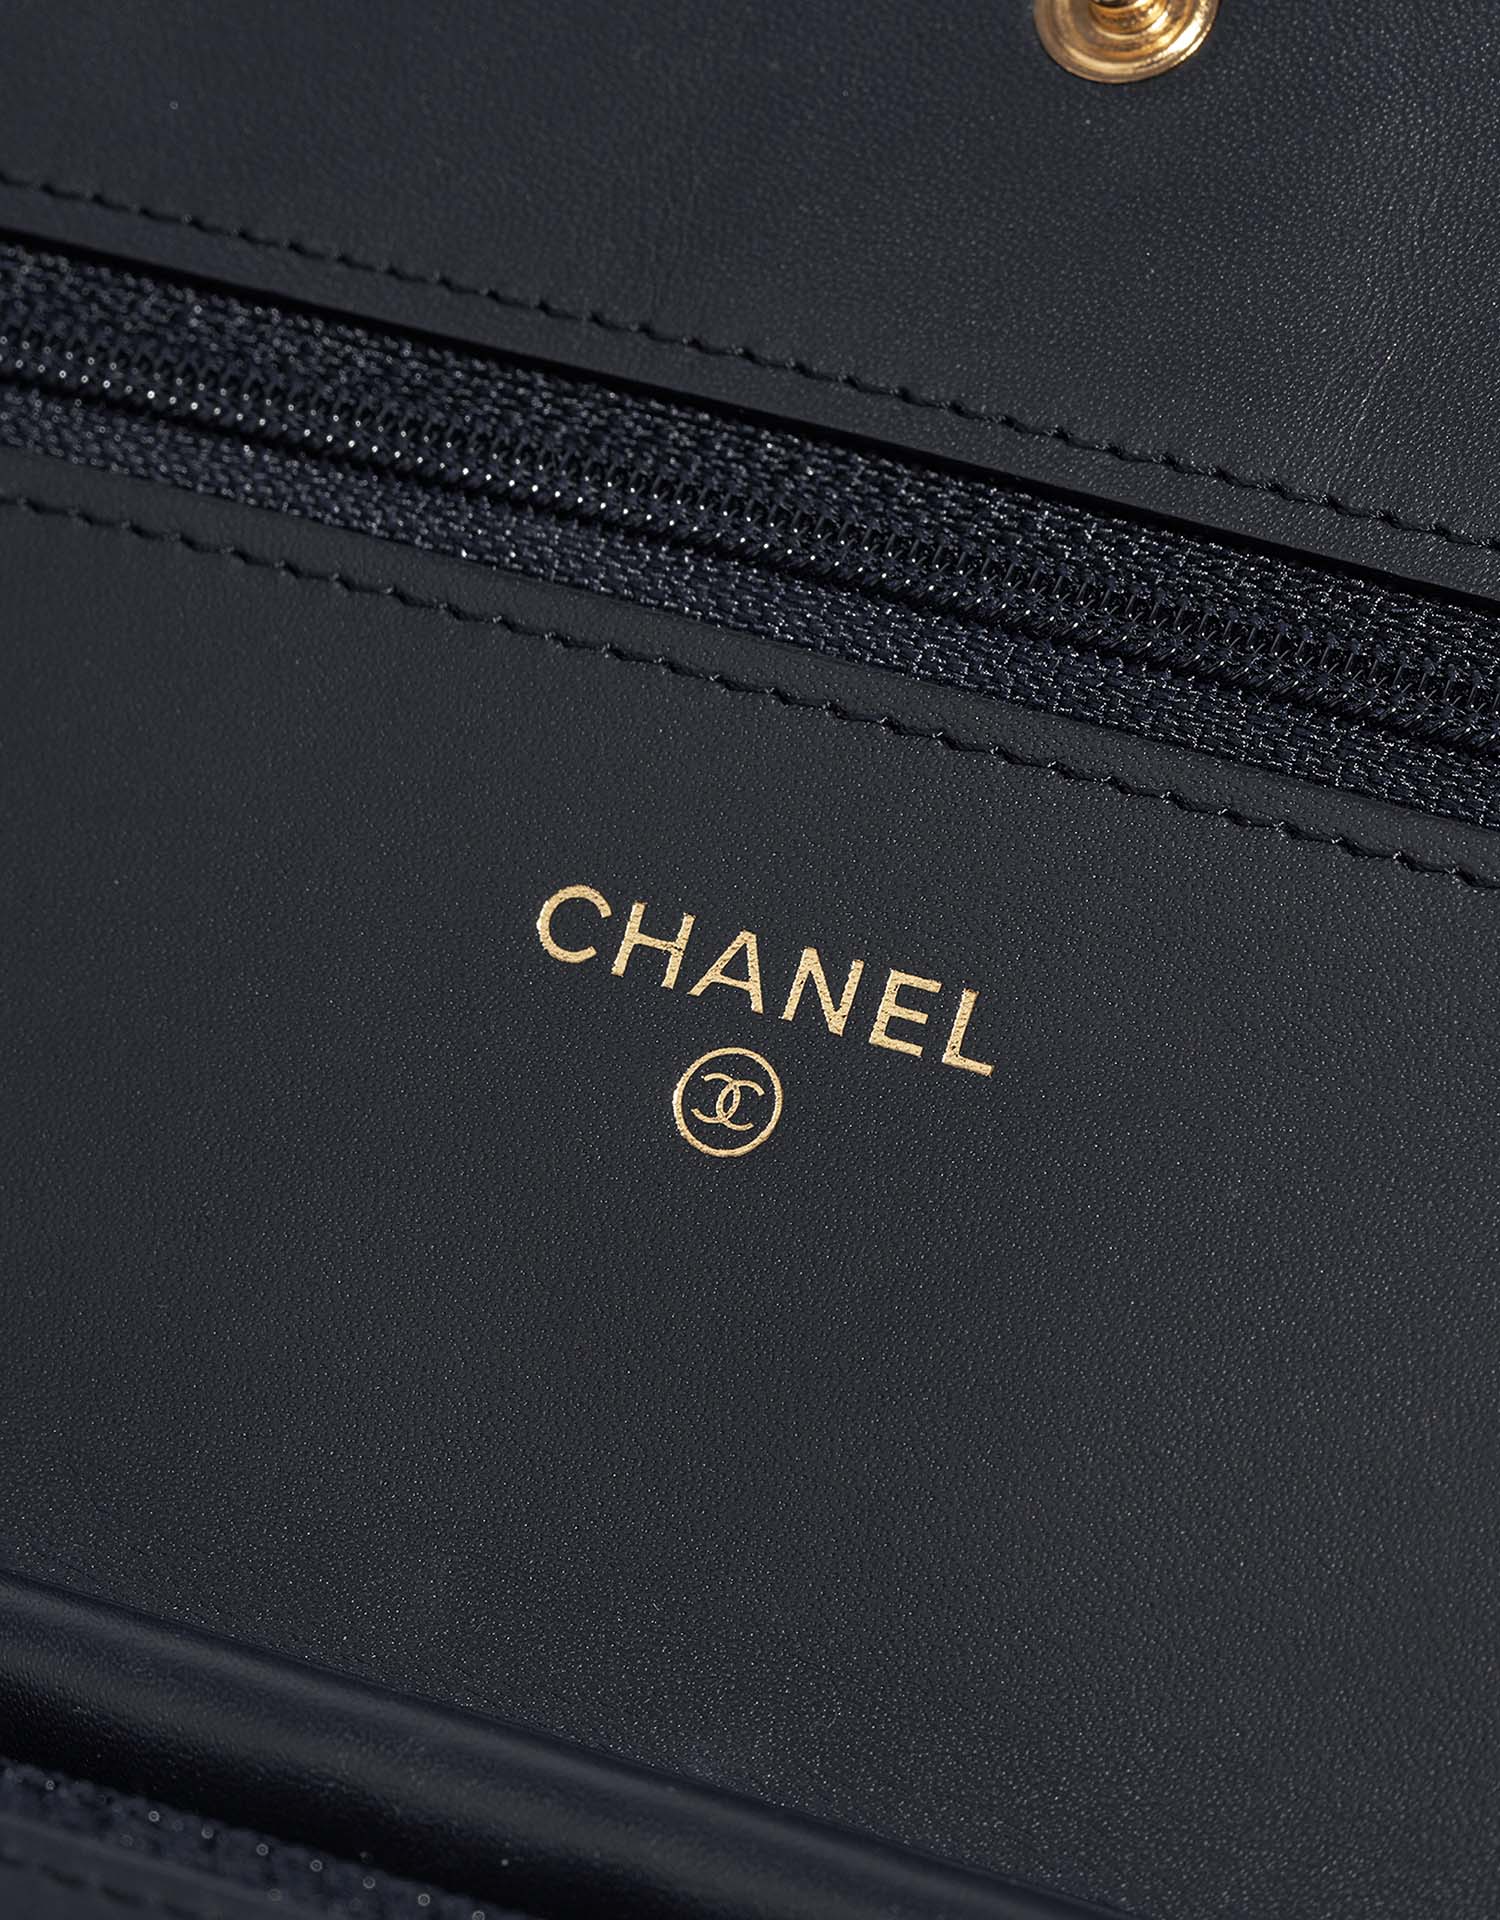 Pre-owned Chanel bag 2.55 Reissue Wallet On Chain Aged Calf Dark Blue Blue | Sell your designer bag on Saclab.com